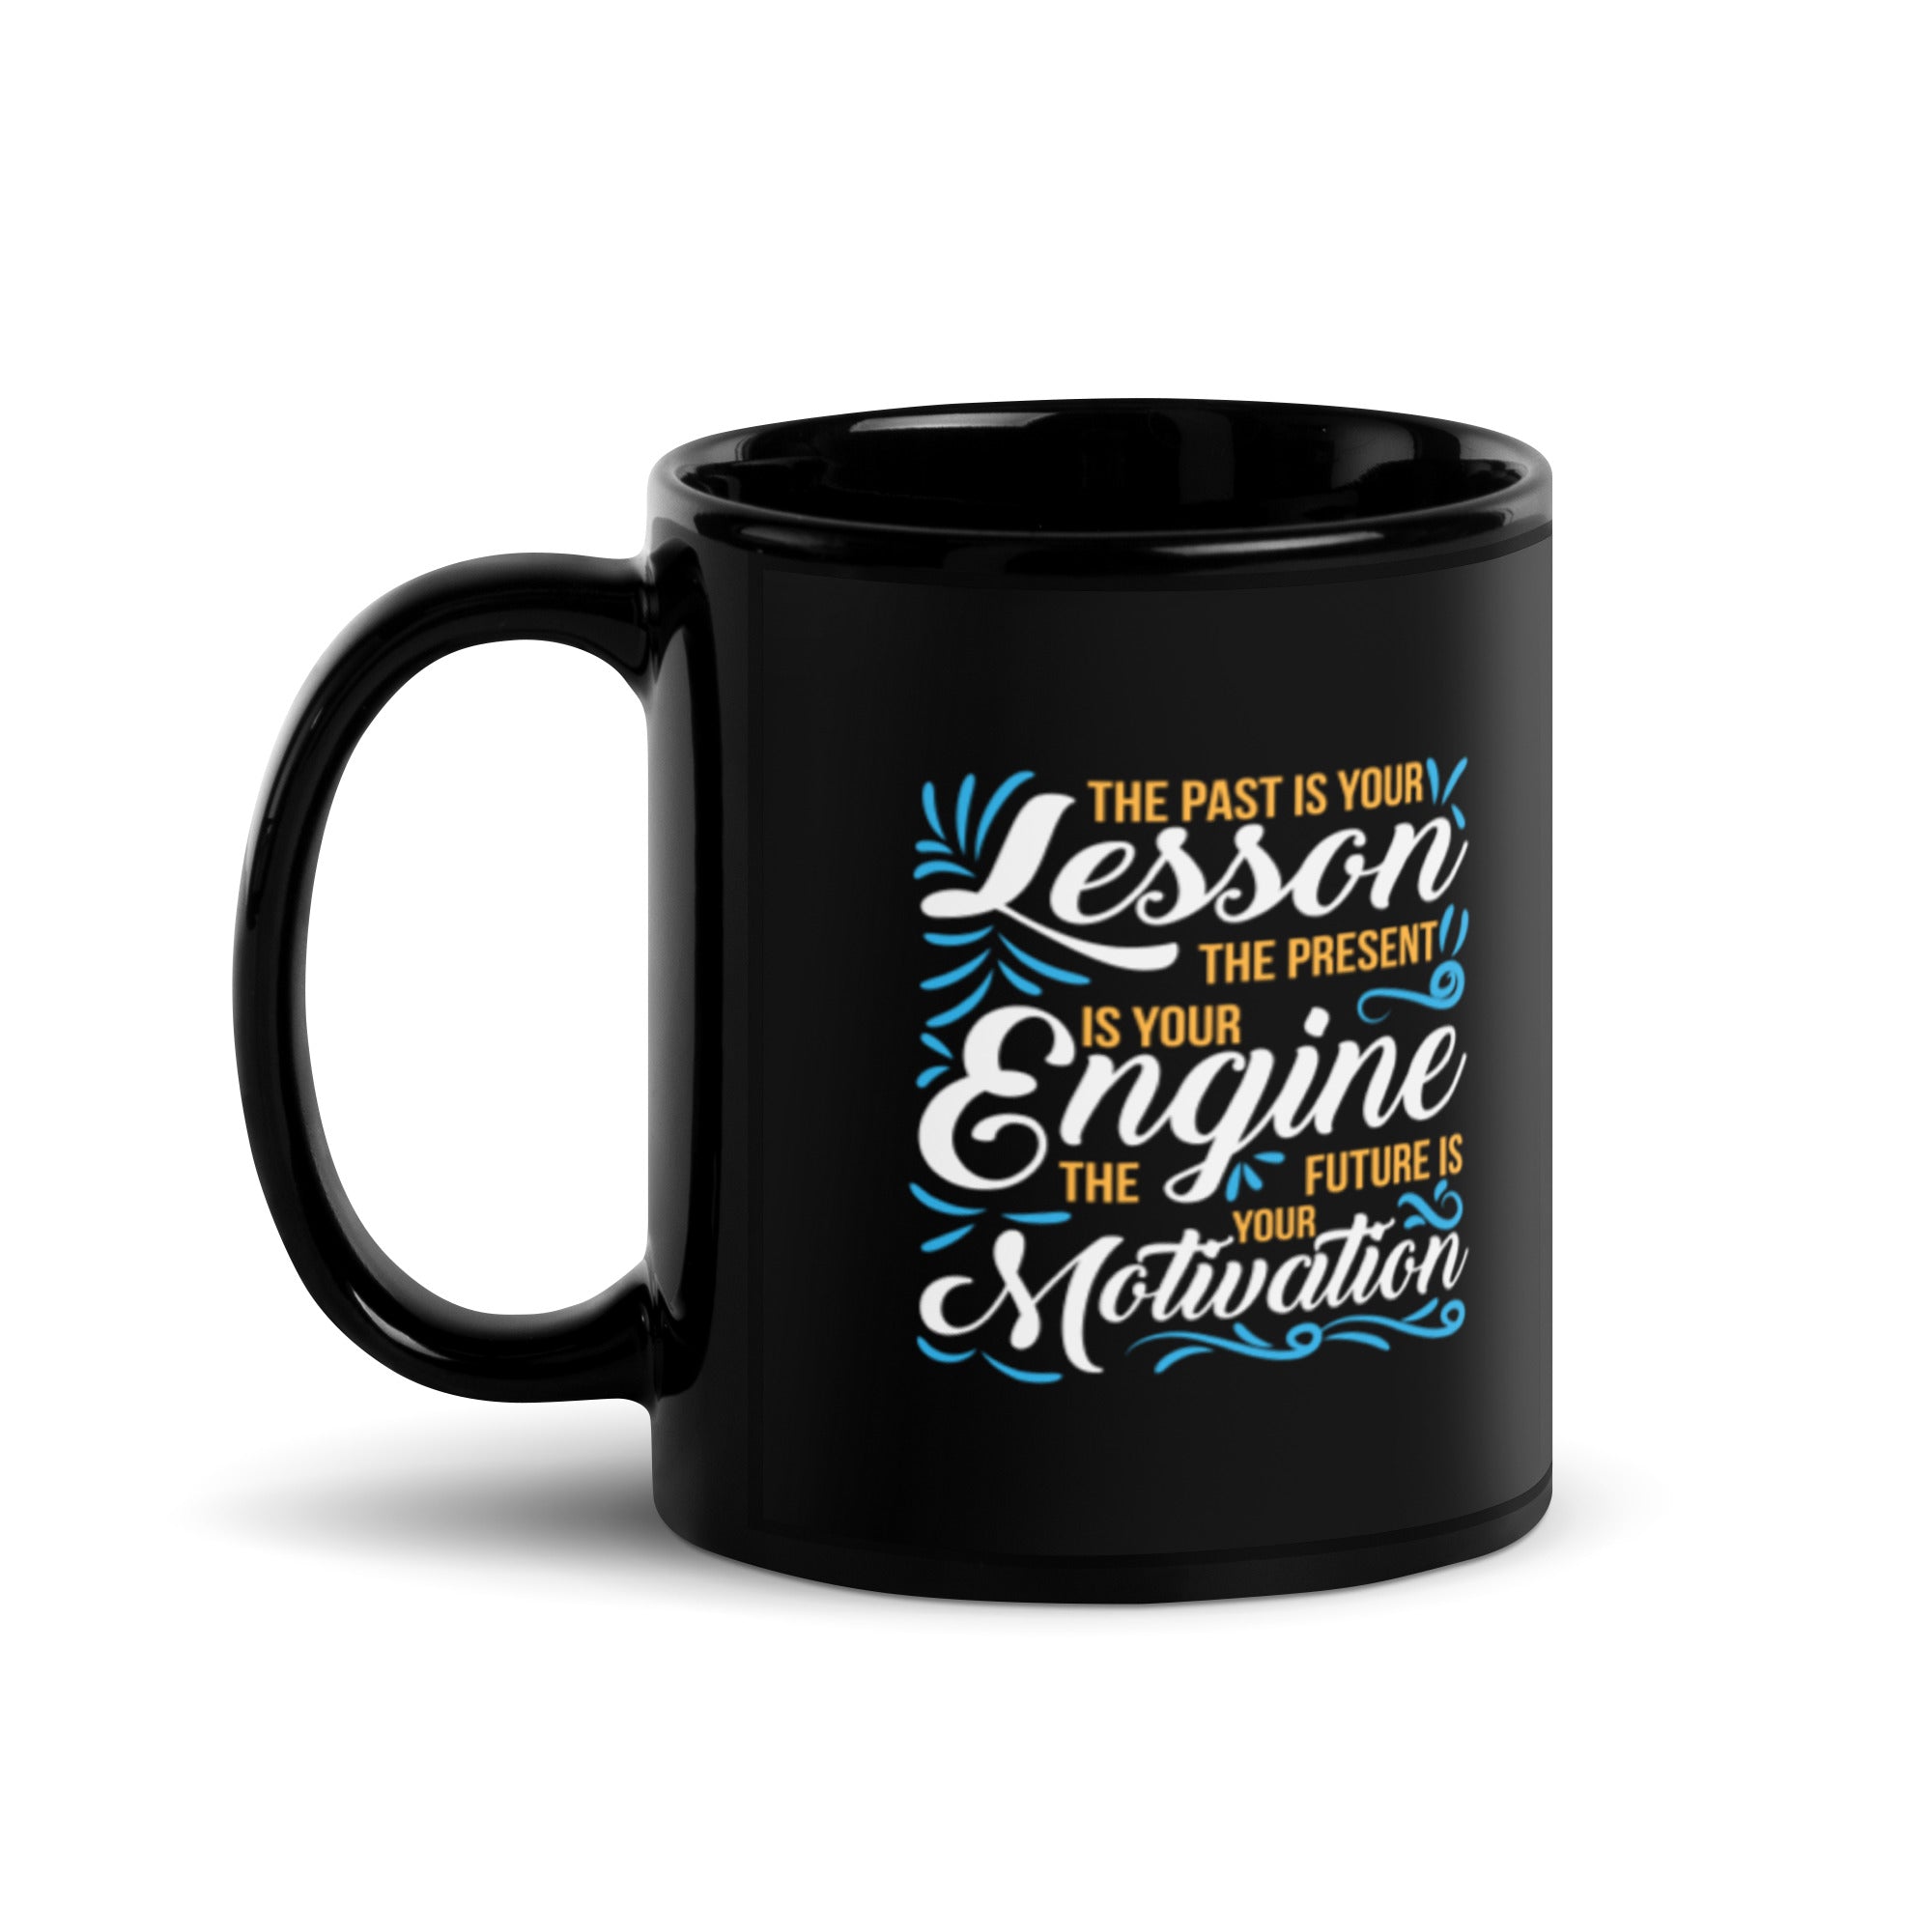 The Past Is Your Lesson - Black Glossy Mug